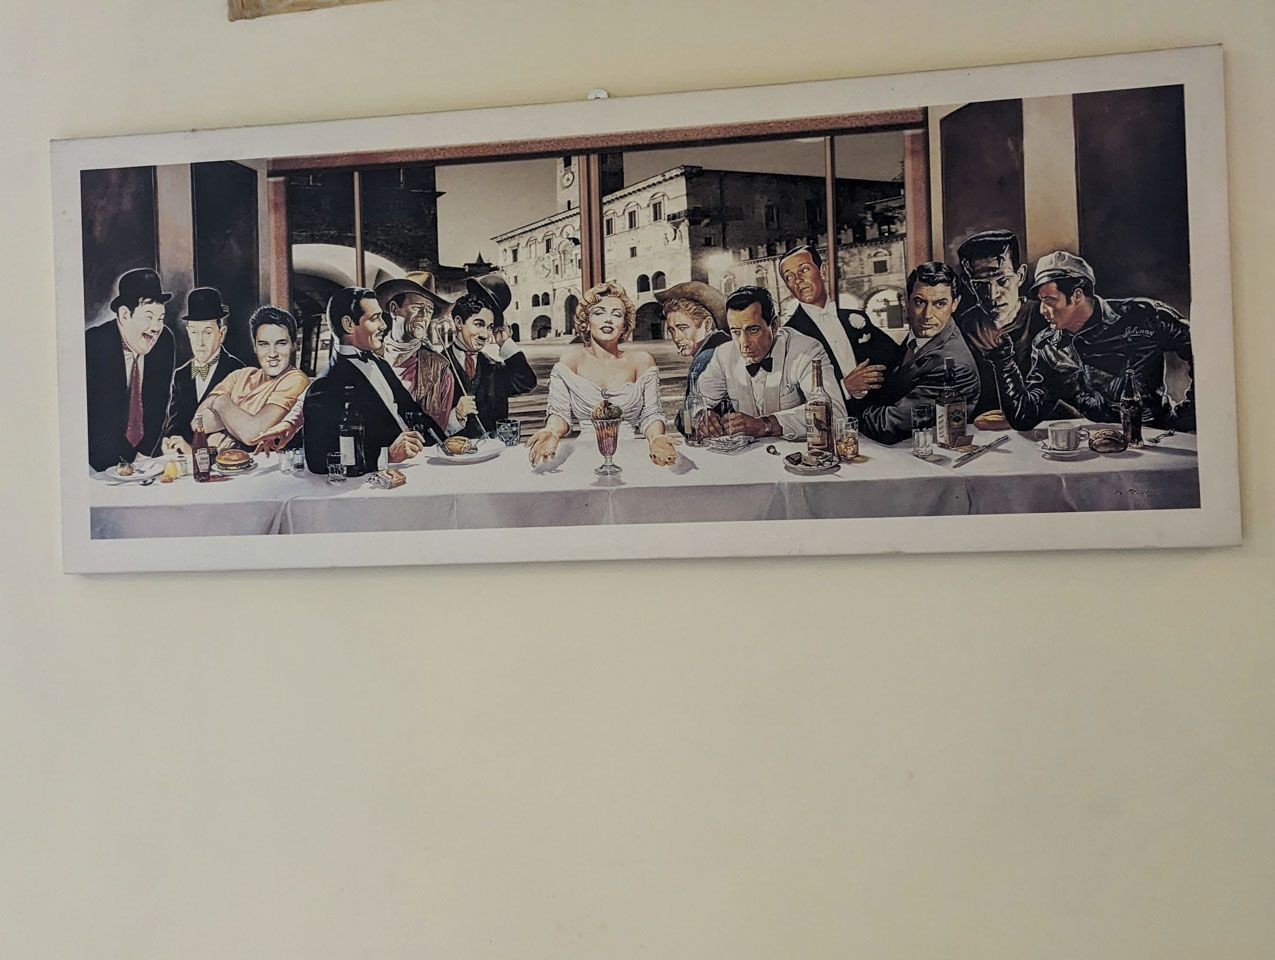 Poster designed to look like The Last Supper, with various Hollywood stars, and a background of the local Italian city